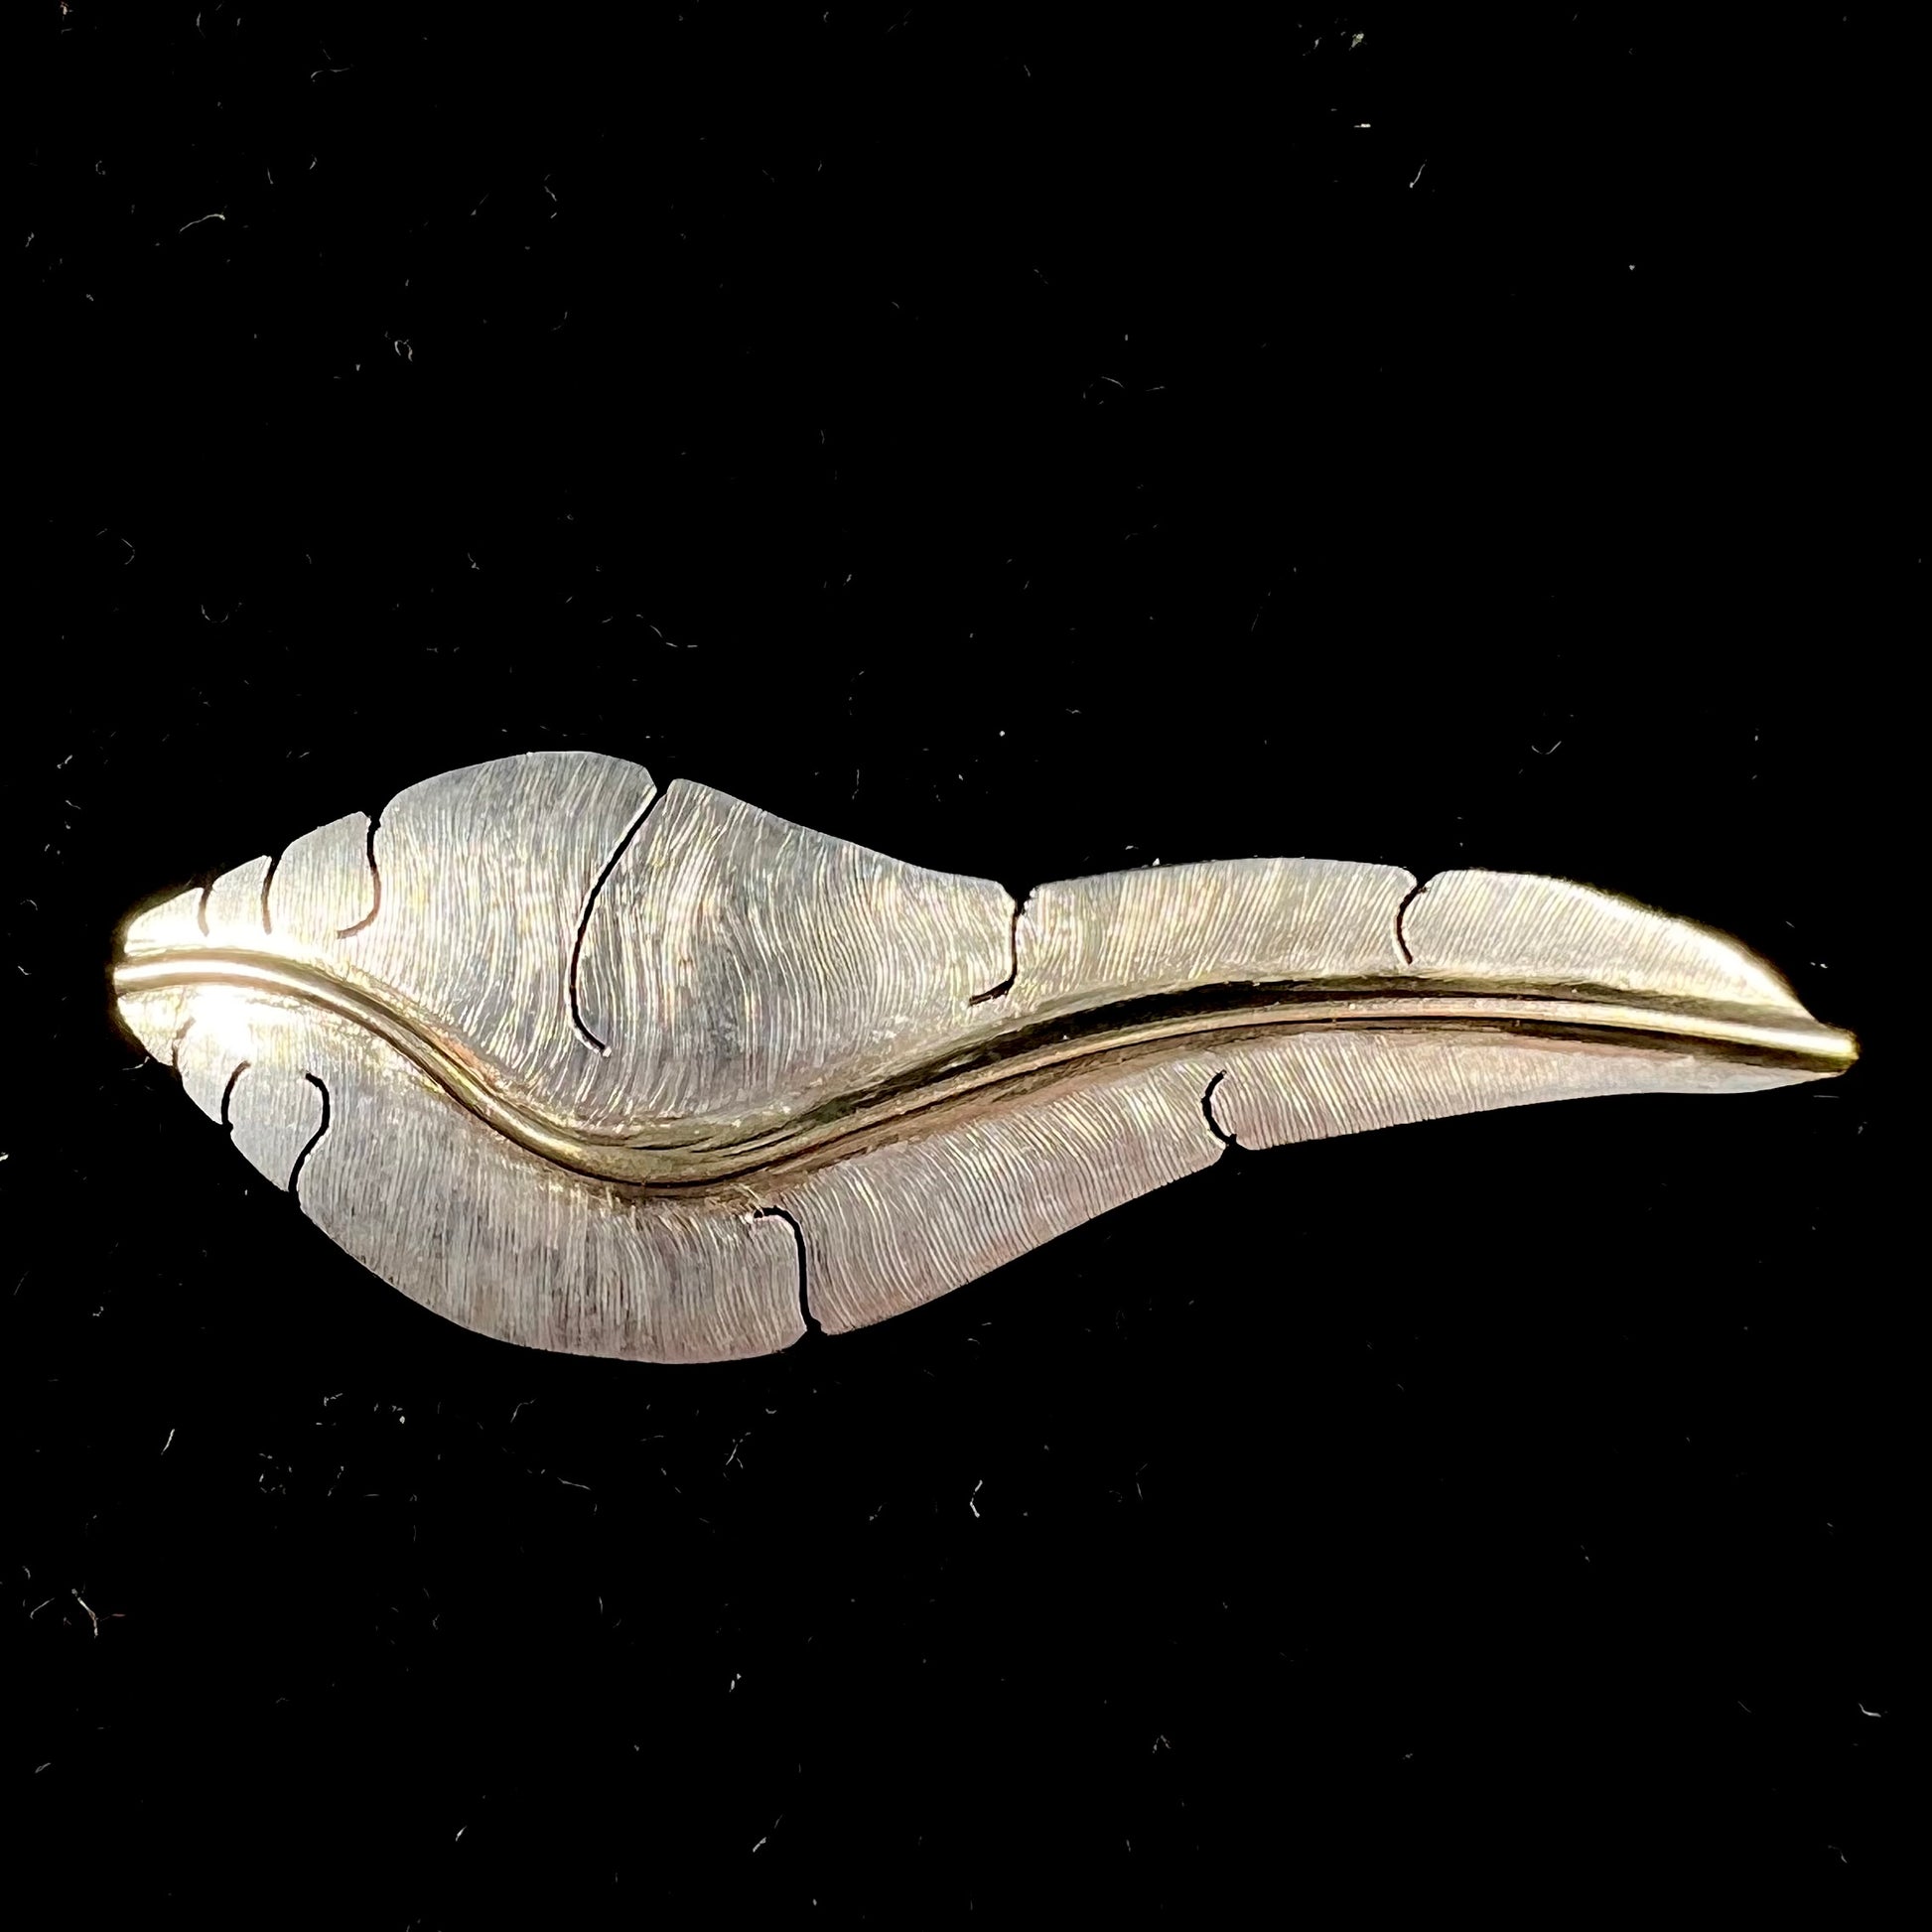 A two-tone silver and gold feather pin, handmade by Isleta Pueblo Indian artist, Michael Kirk.